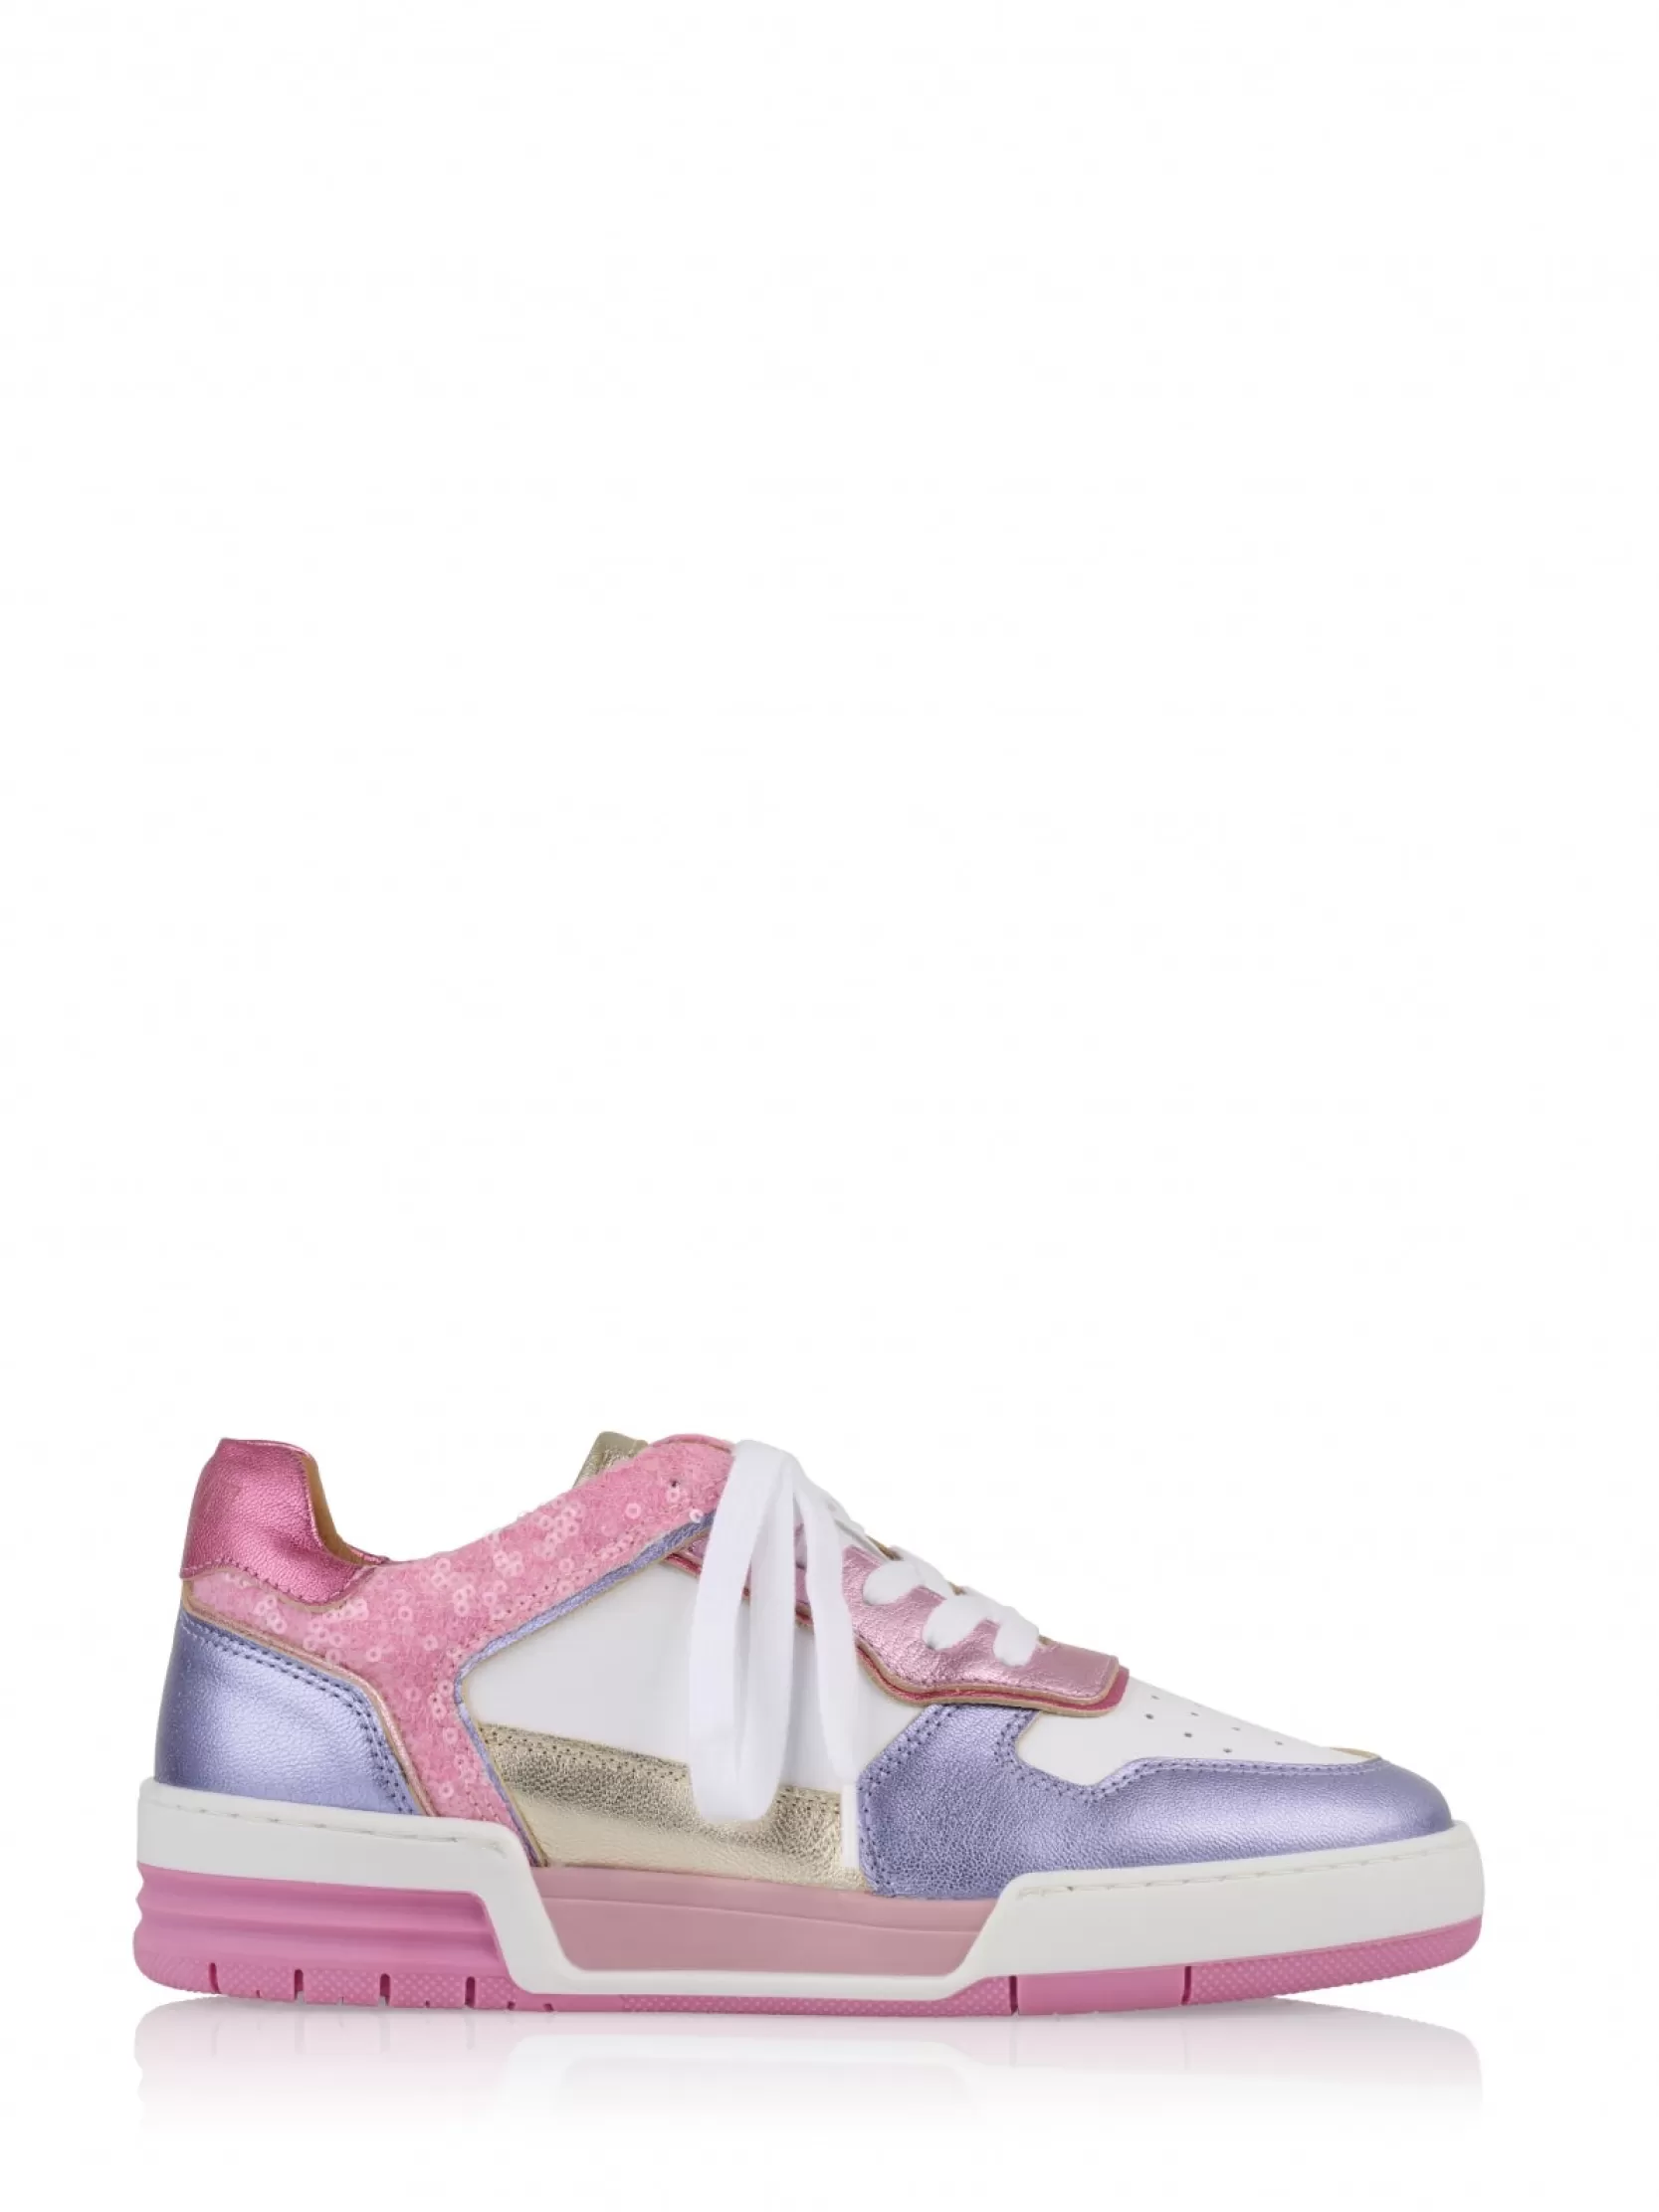 DWRS label SNEAKERS>RUGBY sequins - Sneakers | Pink / Lila